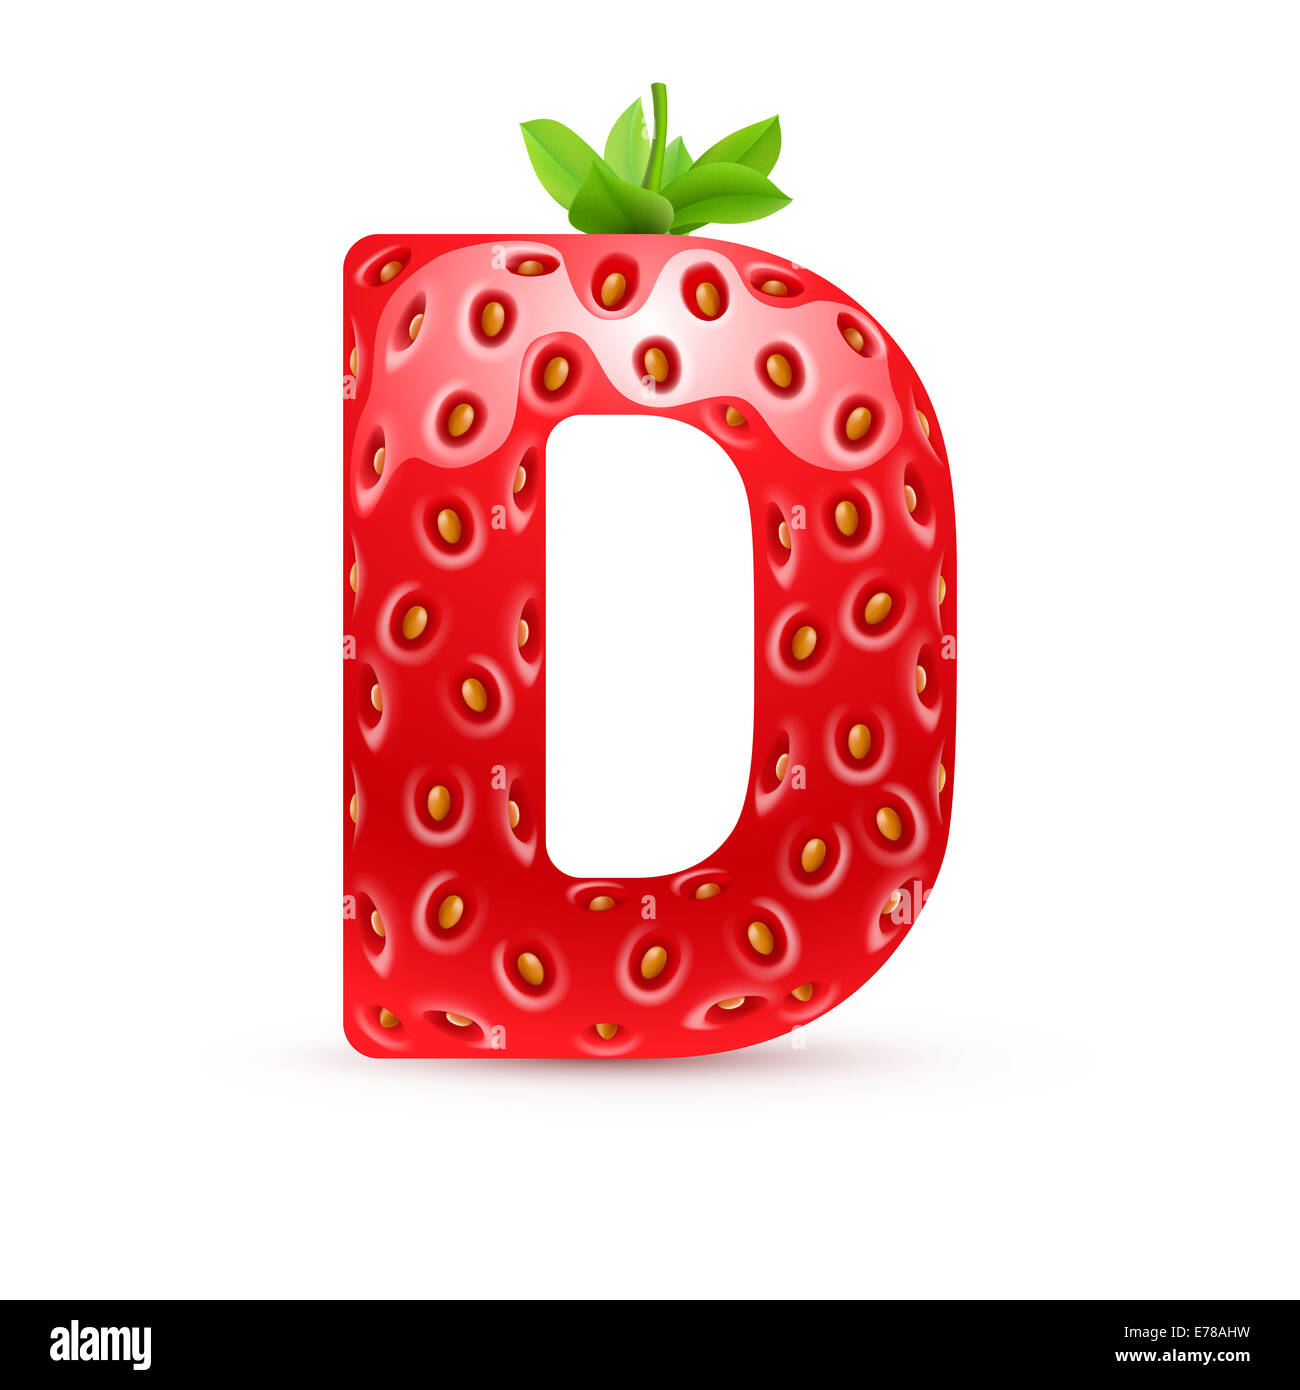 Letter D in strawberry style with green leaves Stock Photo